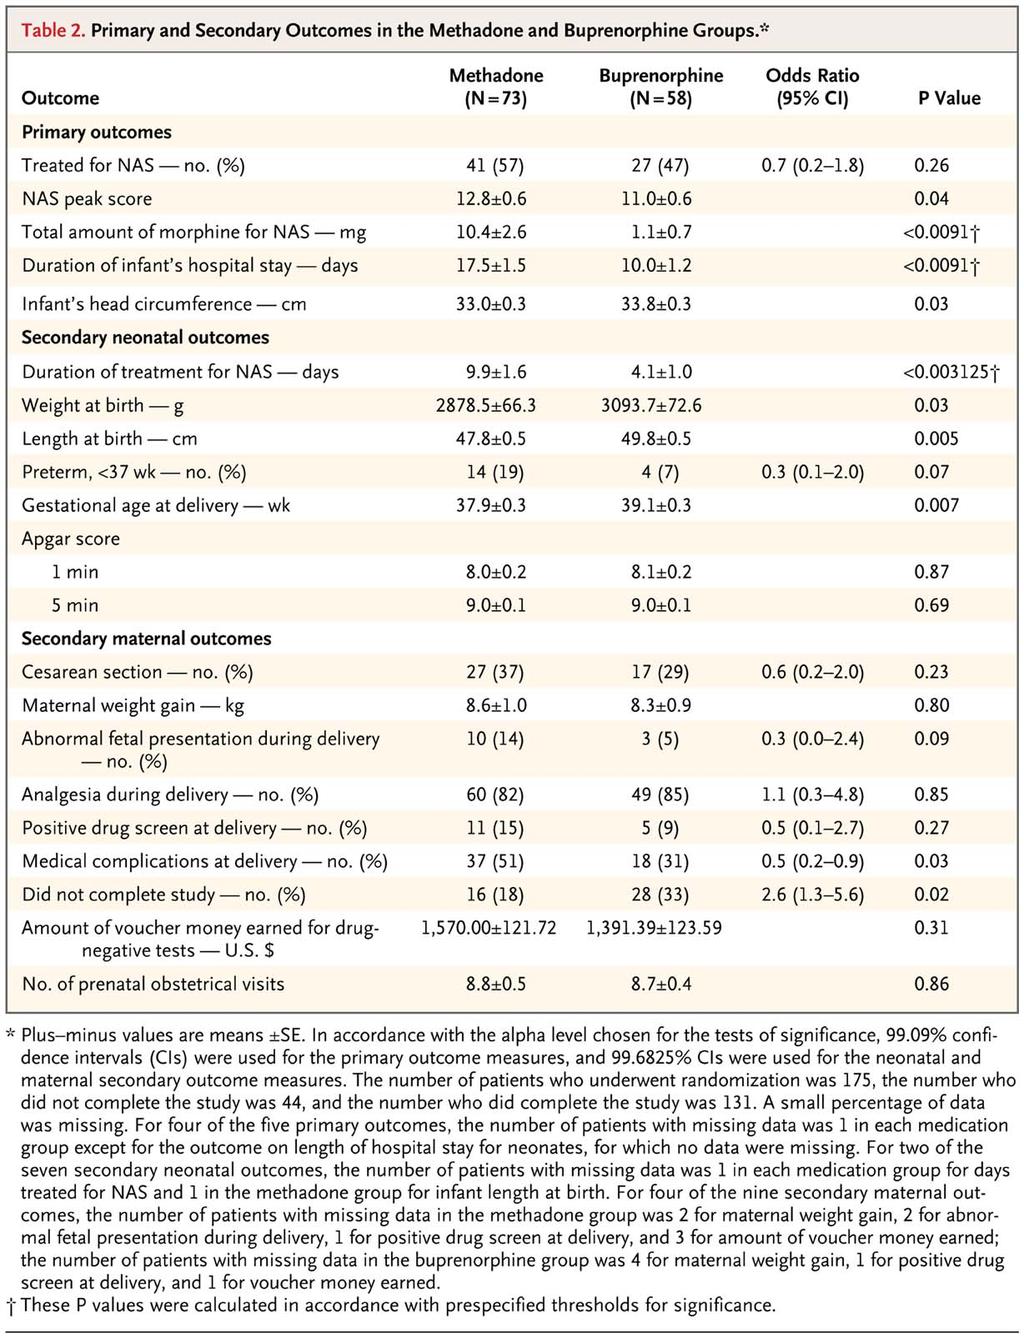 Primary and Secondary Outcomes in the Methadone and